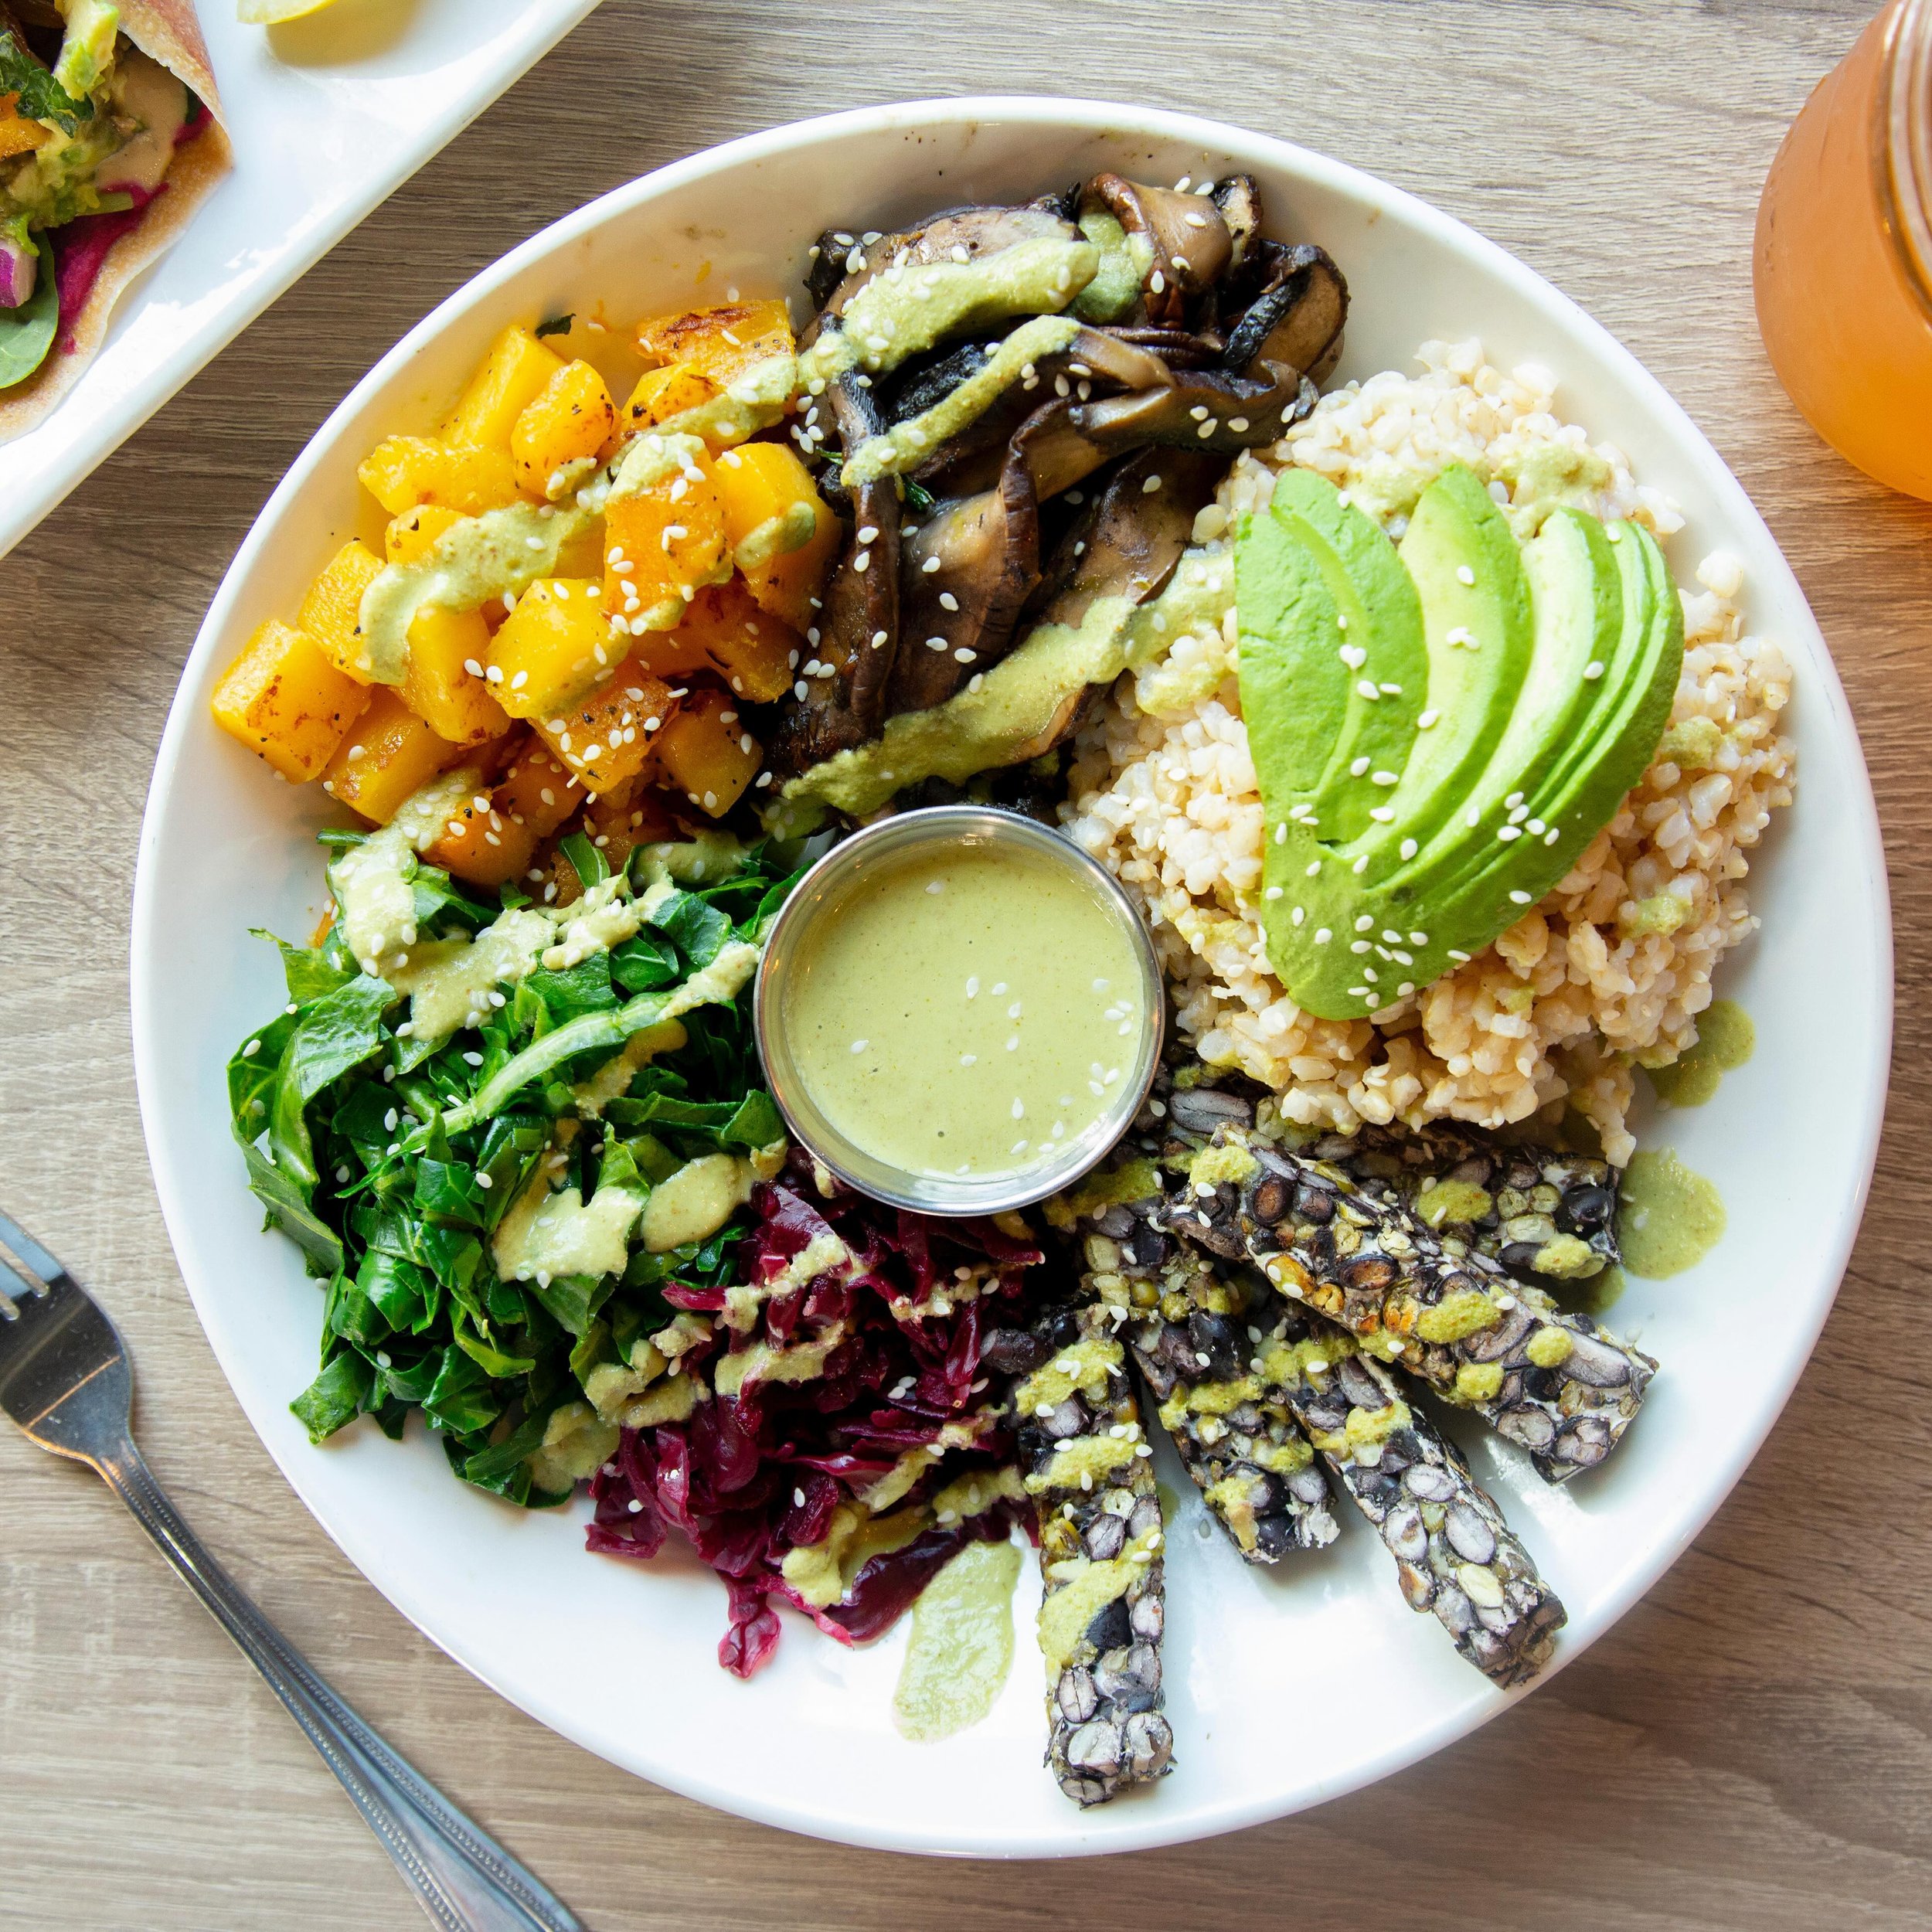 Discover the power of plant-based eating at our Cafe 🌱 Our Plant Powered protein bowl is packed with goodness: brown rice for sustained energy, protein-rich mung &amp; black bean tempeh for muscle fuel, and nutrient-dense ingredients like portobello